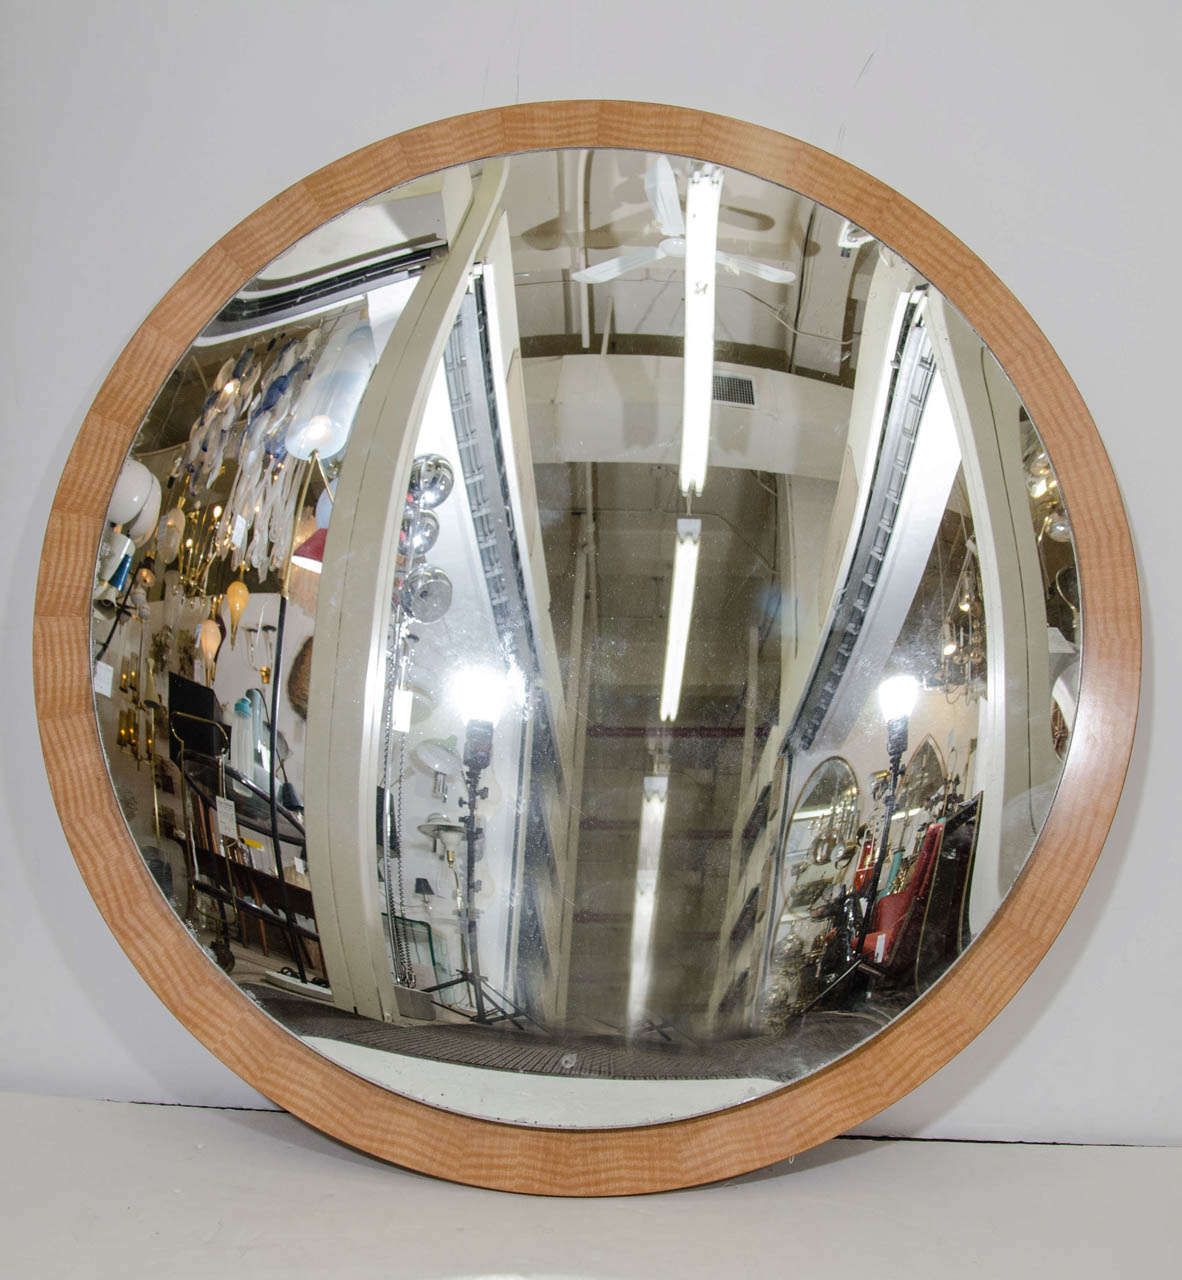 A 21st century convex wall mirror with birchwood circular frame.

Good condition. Some wear around the edges of the mirror and some scratches.